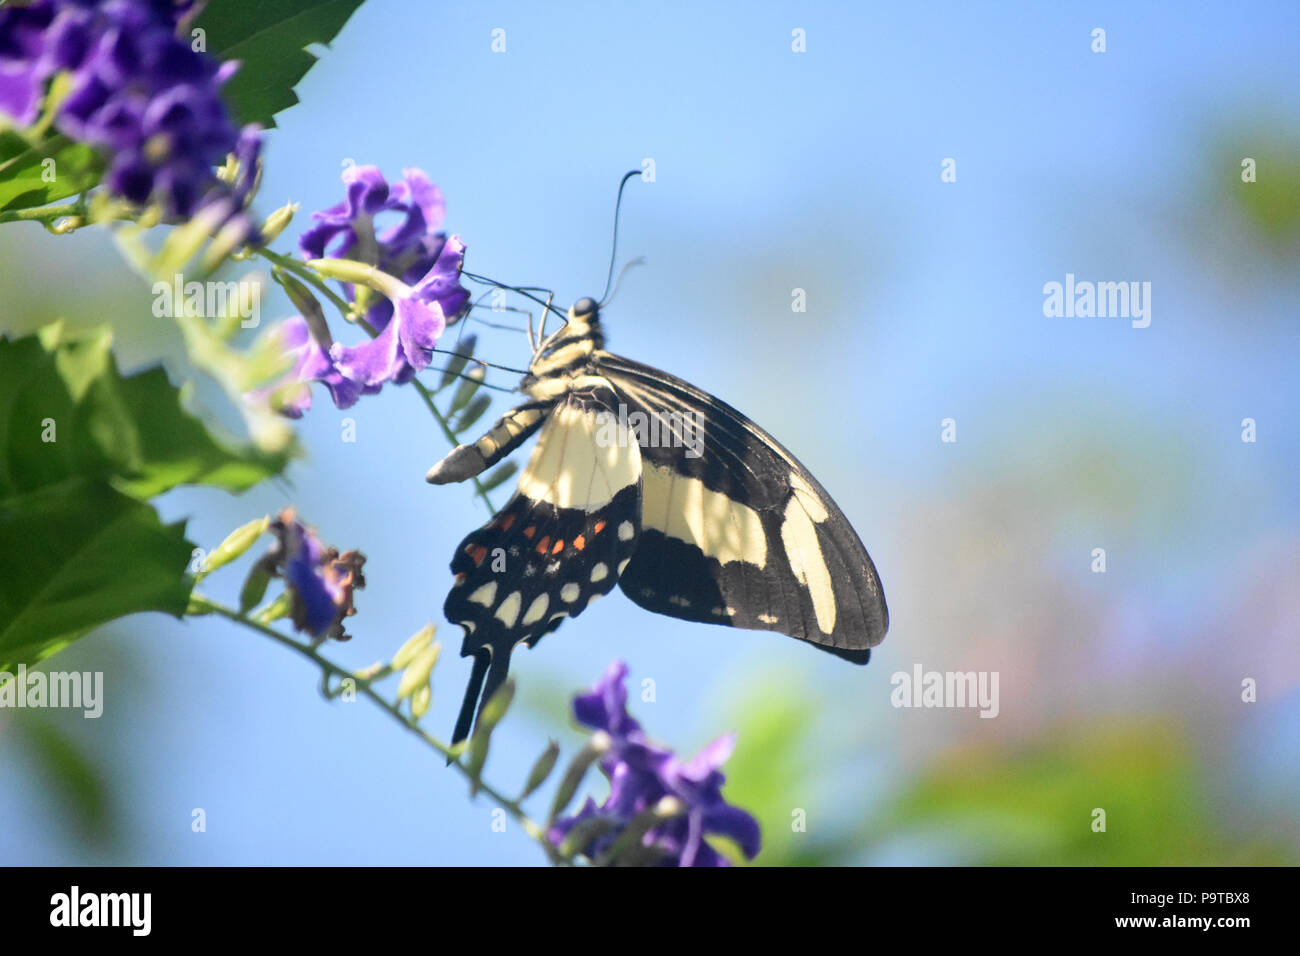 Very pretty yellow and black swallowtail butterfly on flowers. Stock Photo